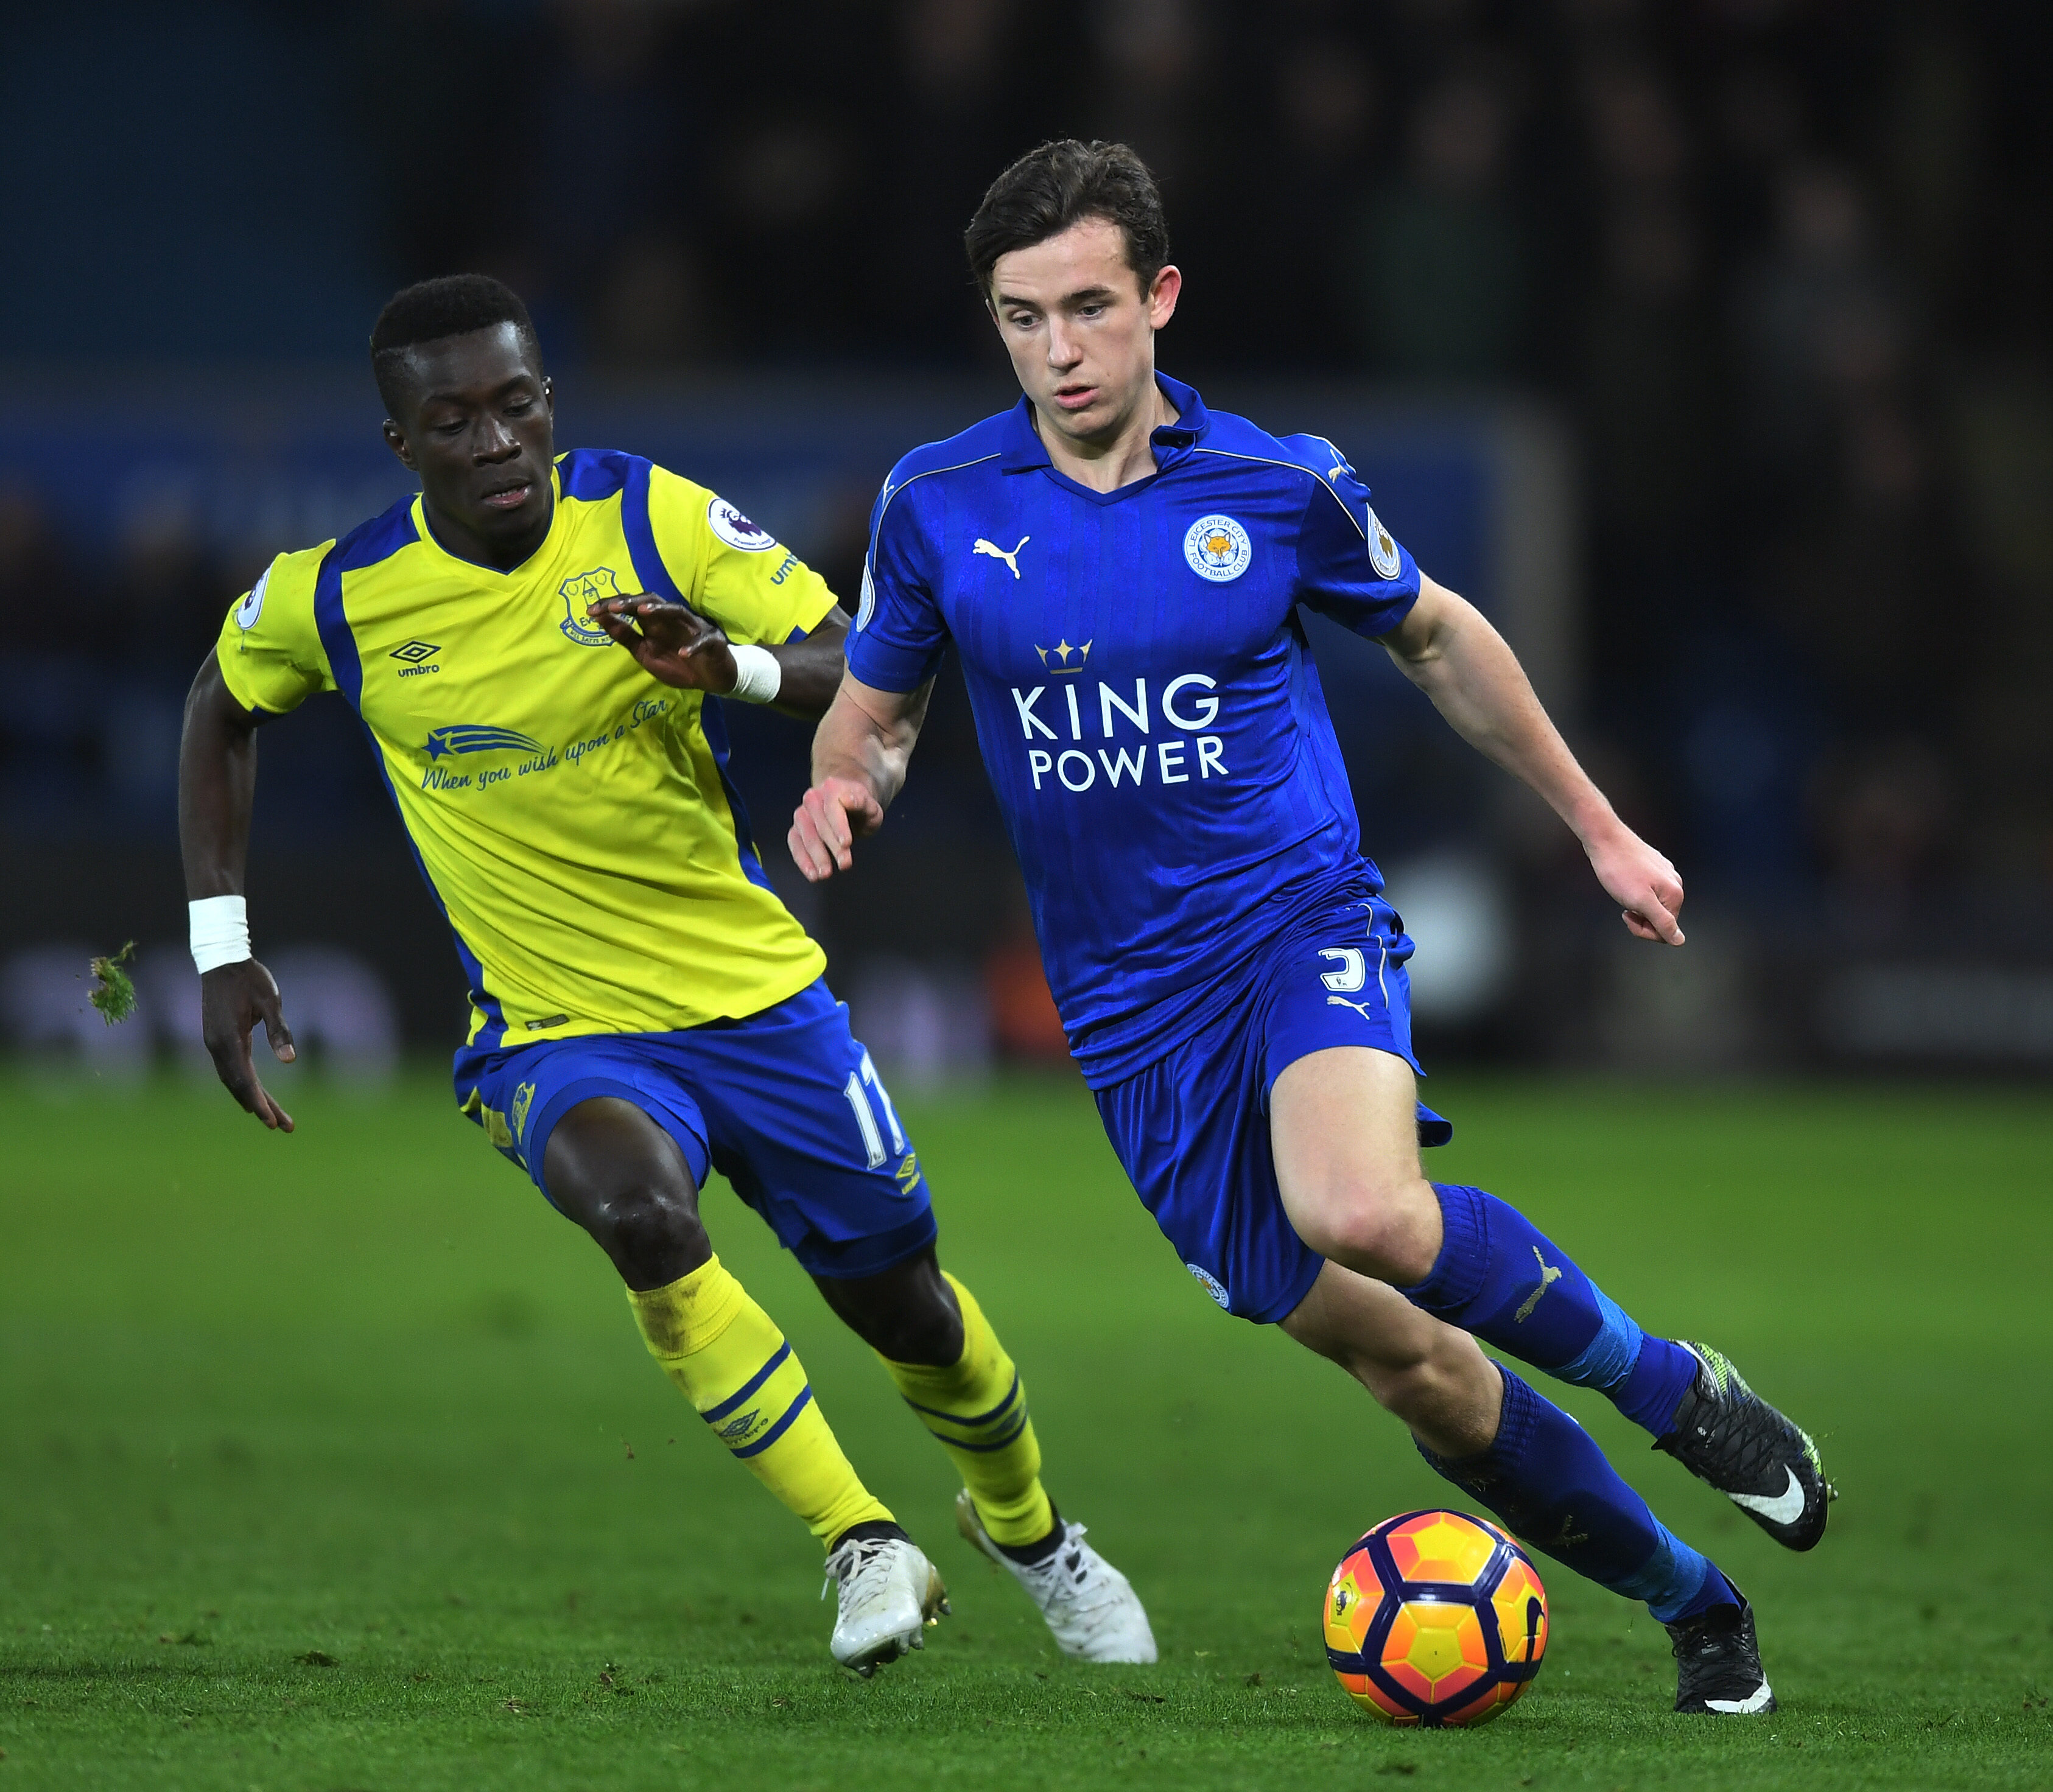 LEICESTER, ENGLAND - DECEMBER 26:  Ben Chilwell of Leicester City is pursued by Idrissa Gueye of Everton during the Premier League match between Leicester City and Everton at The King Power Stadium on December 26, 2016 in Leicester, England.  (Photo by Michael Regan/Getty Images)